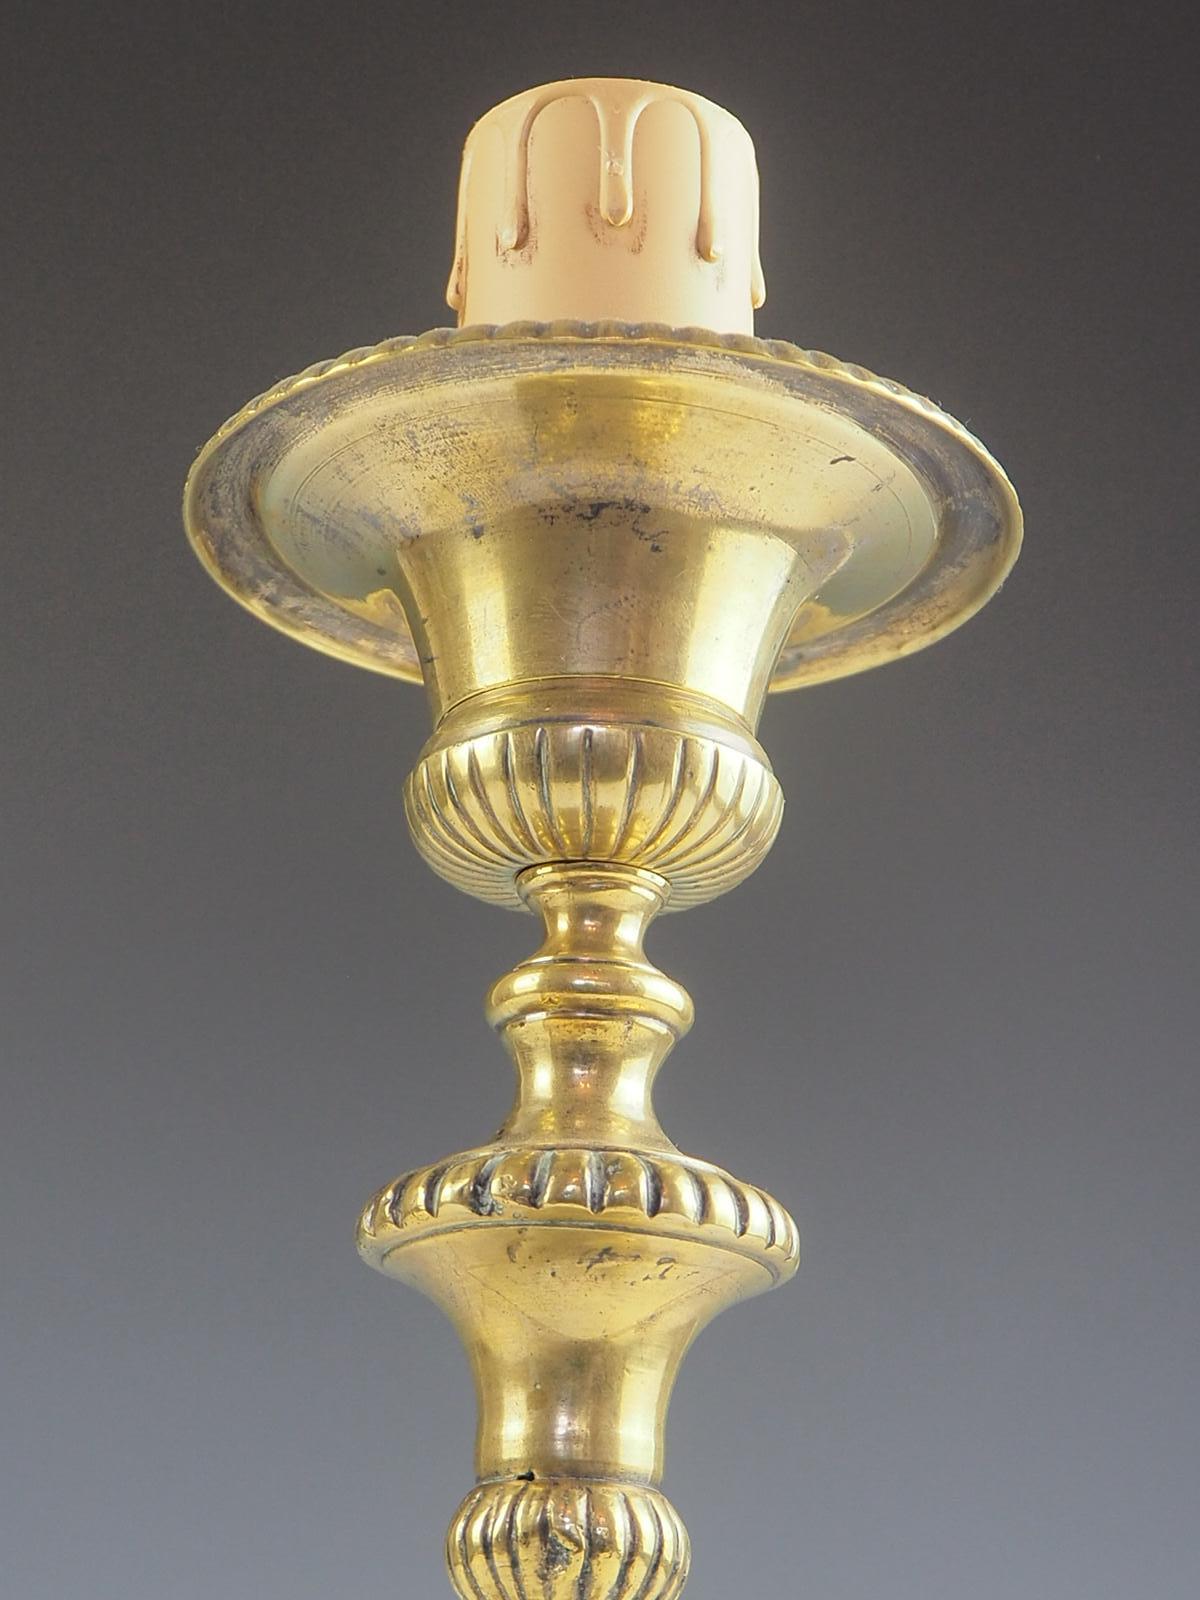 Antique Brass French Church Altar Candlestick Table Lamp with Puttis 5